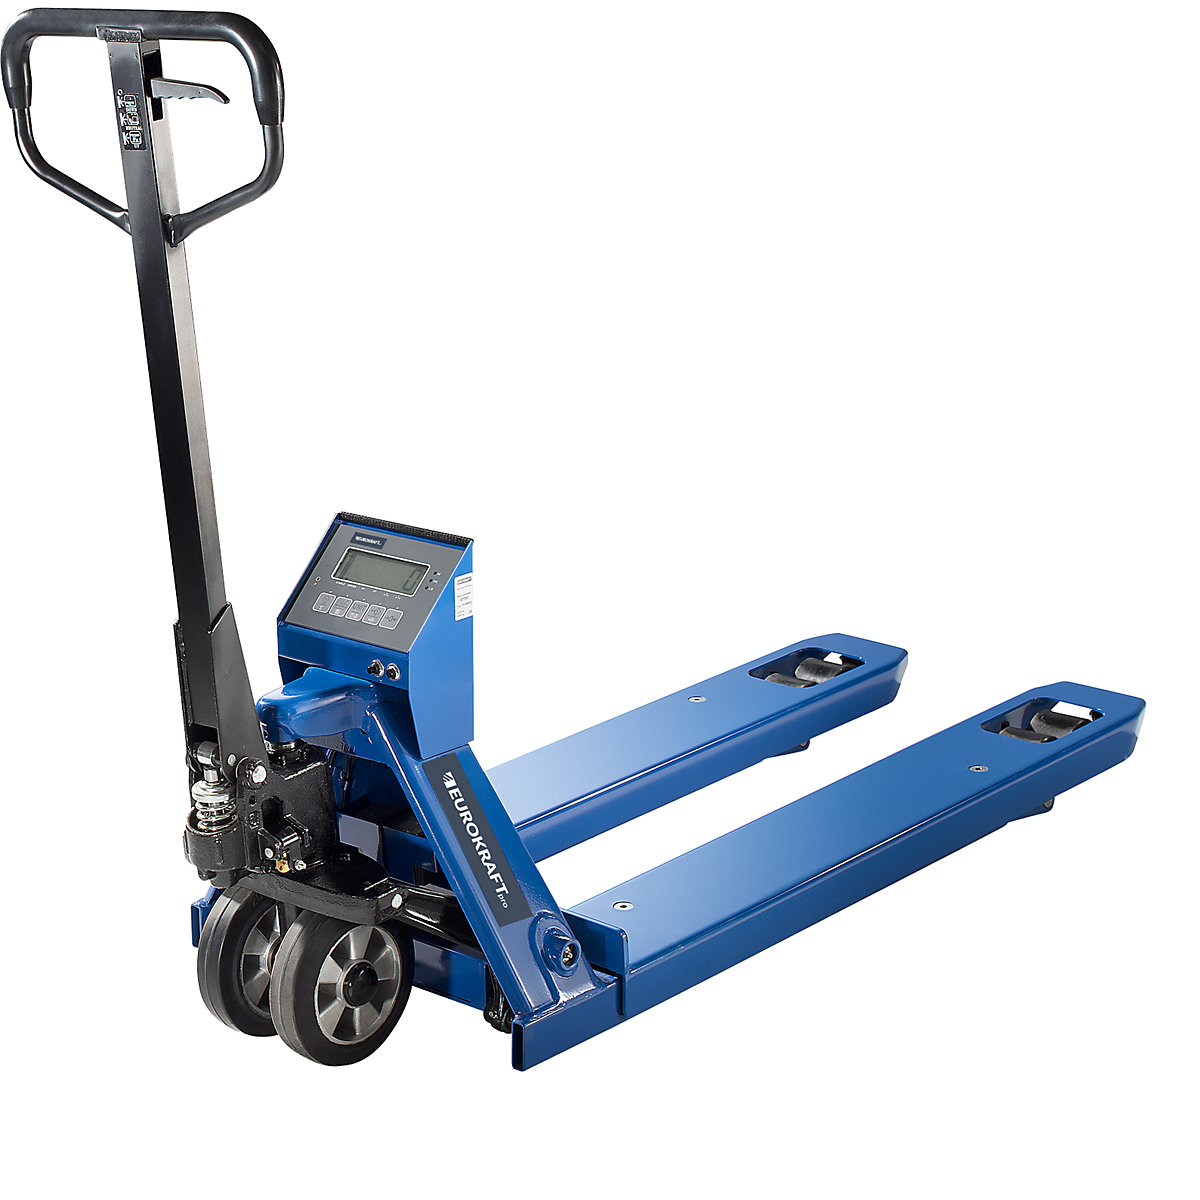 Pallet truck with weighing scale – eurokraft pro, max. load 2200 kg, 1 kg scale division